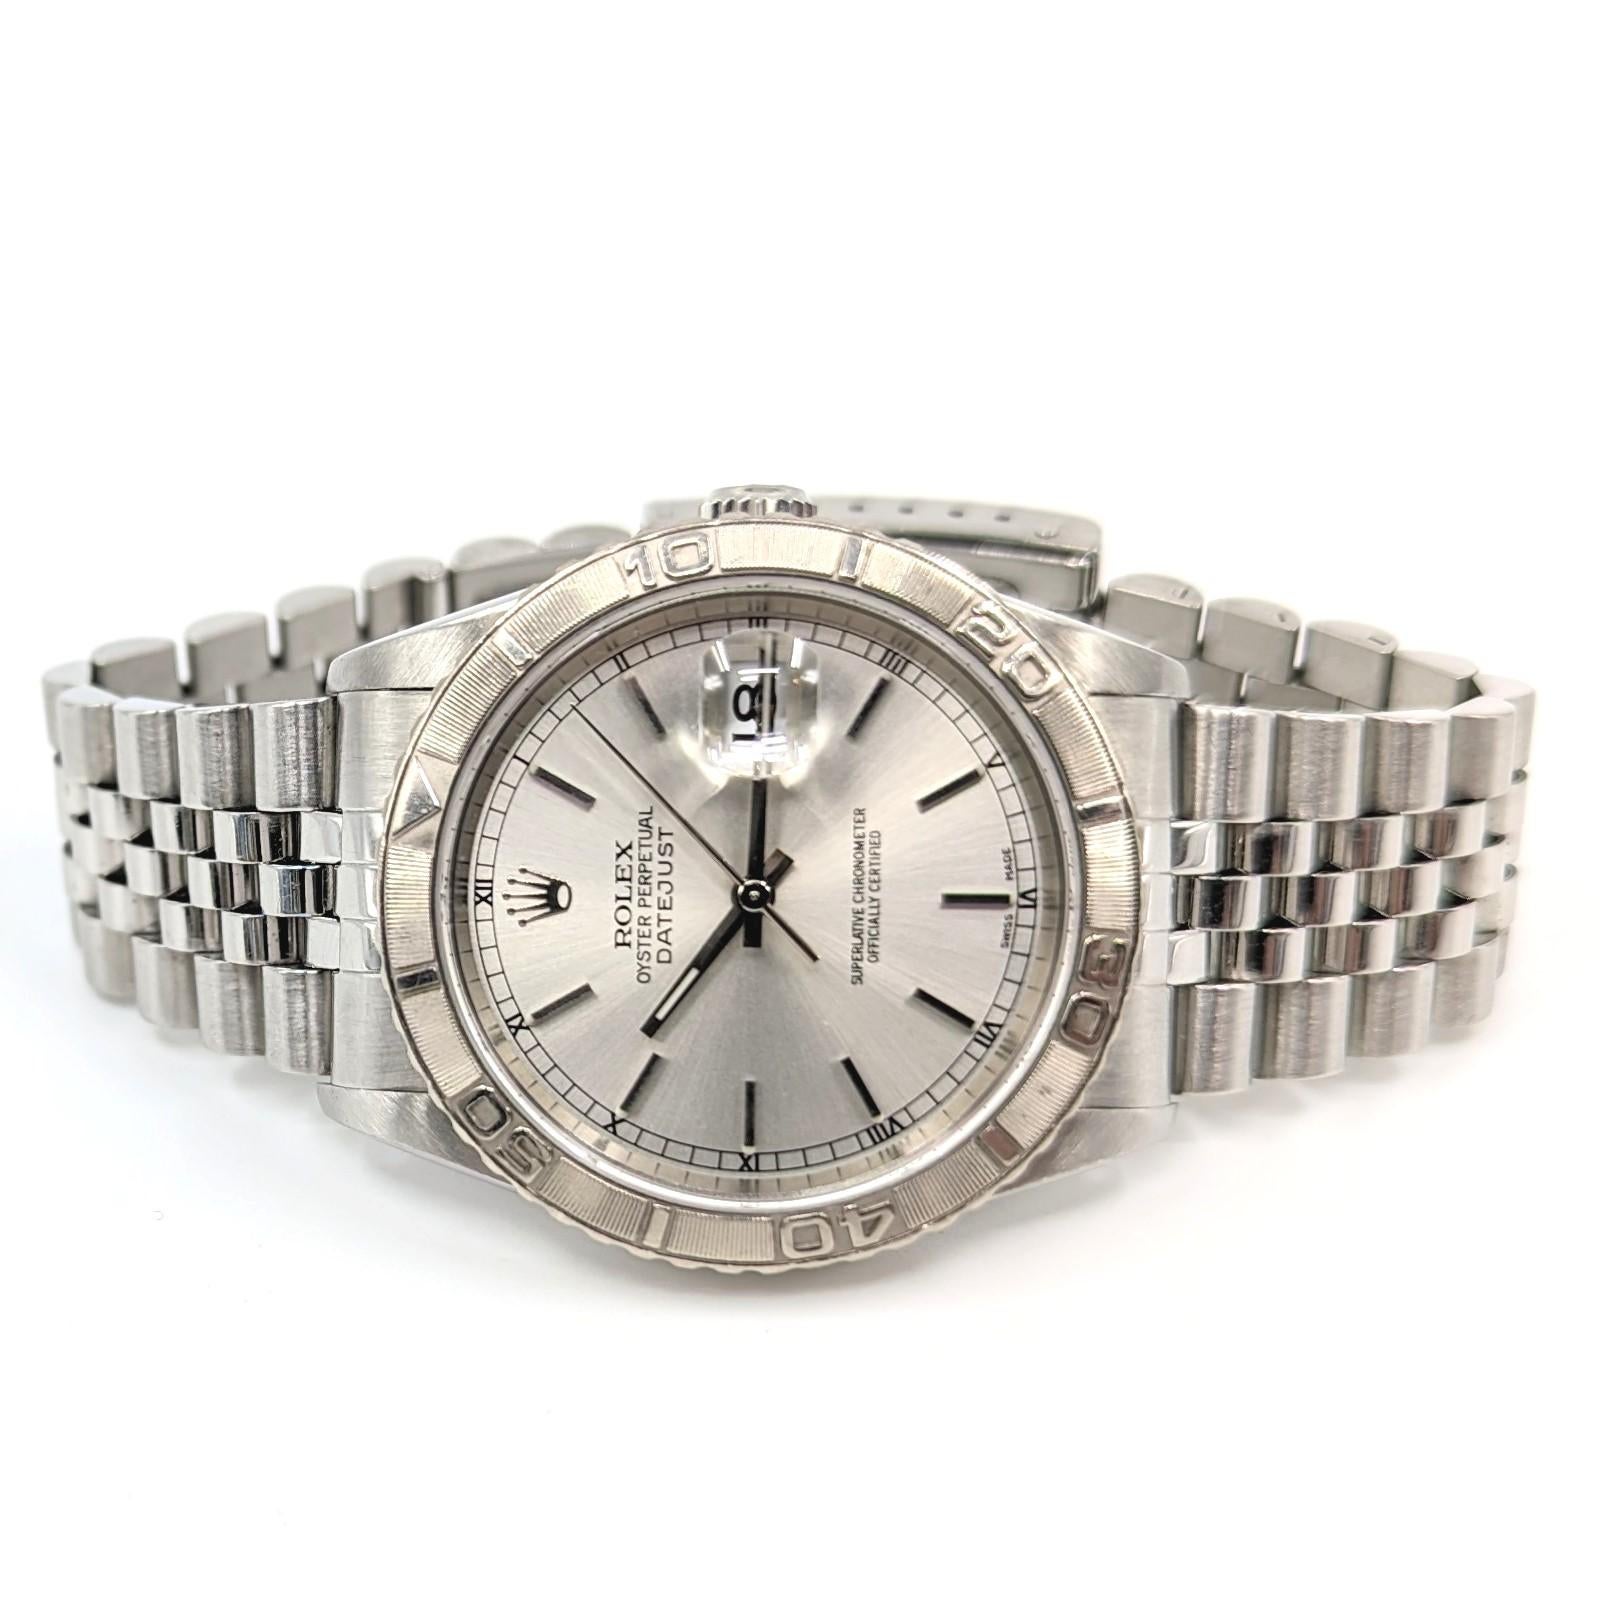 Belle montre Rolex Oyster Perpetual Datejust Turn-o-graph 